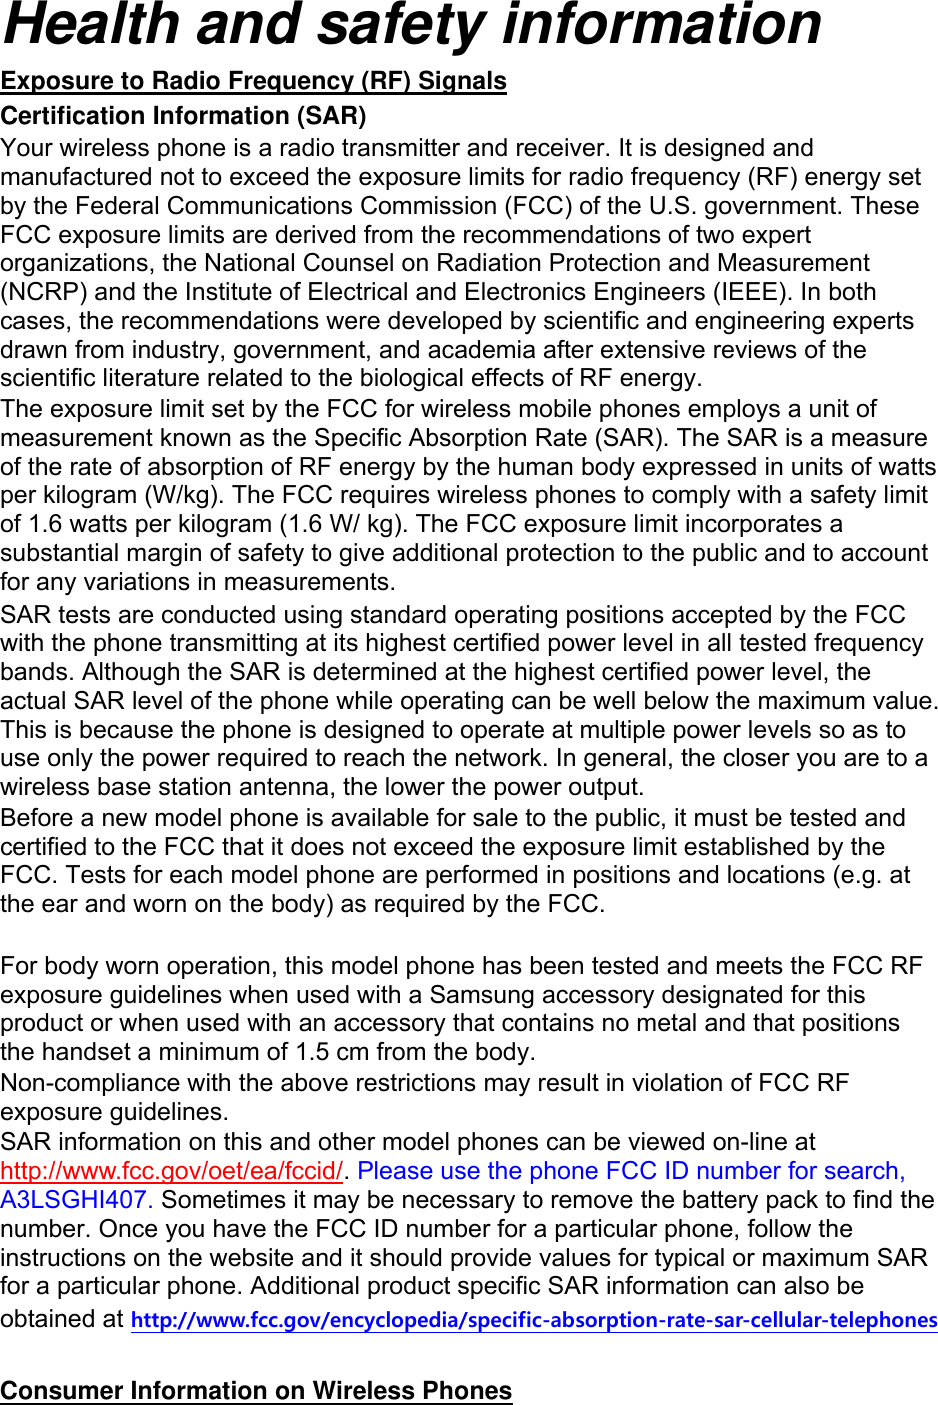 Health and safety information Exposure to Radio Frequency (RF) Signals Certification Information (SAR) Your wireless phone is a radio transmitter and receiver. It is designed and manufactured not to exceed the exposure limits for radio frequency (RF) energy set by the Federal Communications Commission (FCC) of the U.S. government. These FCC exposure limits are derived from the recommendations of two expert organizations, the National Counsel on Radiation Protection and Measurement (NCRP) and the Institute of Electrical and Electronics Engineers (IEEE). In both cases, the recommendations were developed by scientific and engineering experts drawn from industry, government, and academia after extensive reviews of the scientific literature related to the biological effects of RF energy. The exposure limit set by the FCC for wireless mobile phones employs a unit of measurement known as the Specific Absorption Rate (SAR). The SAR is a measure of the rate of absorption of RF energy by the human body expressed in units of watts per kilogram (W/kg). The FCC requires wireless phones to comply with a safety limit of 1.6 watts per kilogram (1.6 W/ kg). The FCC exposure limit incorporates a substantial margin of safety to give additional protection to the public and to account for any variations in measurements. SAR tests are conducted using standard operating positions accepted by the FCC with the phone transmitting at its highest certified power level in all tested frequency bands. Although the SAR is determined at the highest certified power level, the actual SAR level of the phone while operating can be well below the maximum value. This is because the phone is designed to operate at multiple power levels so as to use only the power required to reach the network. In general, the closer you are to a wireless base station antenna, the lower the power output. Before a new model phone is available for sale to the public, it must be tested and certified to the FCC that it does not exceed the exposure limit established by the FCC. Tests for each model phone are performed in positions and locations (e.g. at the ear and worn on the body) as required by the FCC.      For body worn operation, this model phone has been tested and meets the FCC RF exposure guidelines when used with a Samsung accessory designated for this product or when used with an accessory that contains no metal and that positions the handset a minimum of 1.5 cm from the body.   Non-compliance with the above restrictions may result in violation of FCC RF exposure guidelines. SAR information on this and other model phones can be viewed on-line at http://www.fcc.gov/oet/ea/fccid/. Please use the phone FCC ID number for search, A3LSGHI407. Sometimes it may be necessary to remove the battery pack to find the number. Once you have the FCC ID number for a particular phone, follow the instructions on the website and it should provide values for typical or maximum SAR for a particular phone. Additional product specific SAR information can also be obtained at http://www.fcc.gov/encyclopedia/specific-absorption-rate-sar-cellular-telephones  Consumer Information on Wireless Phones 